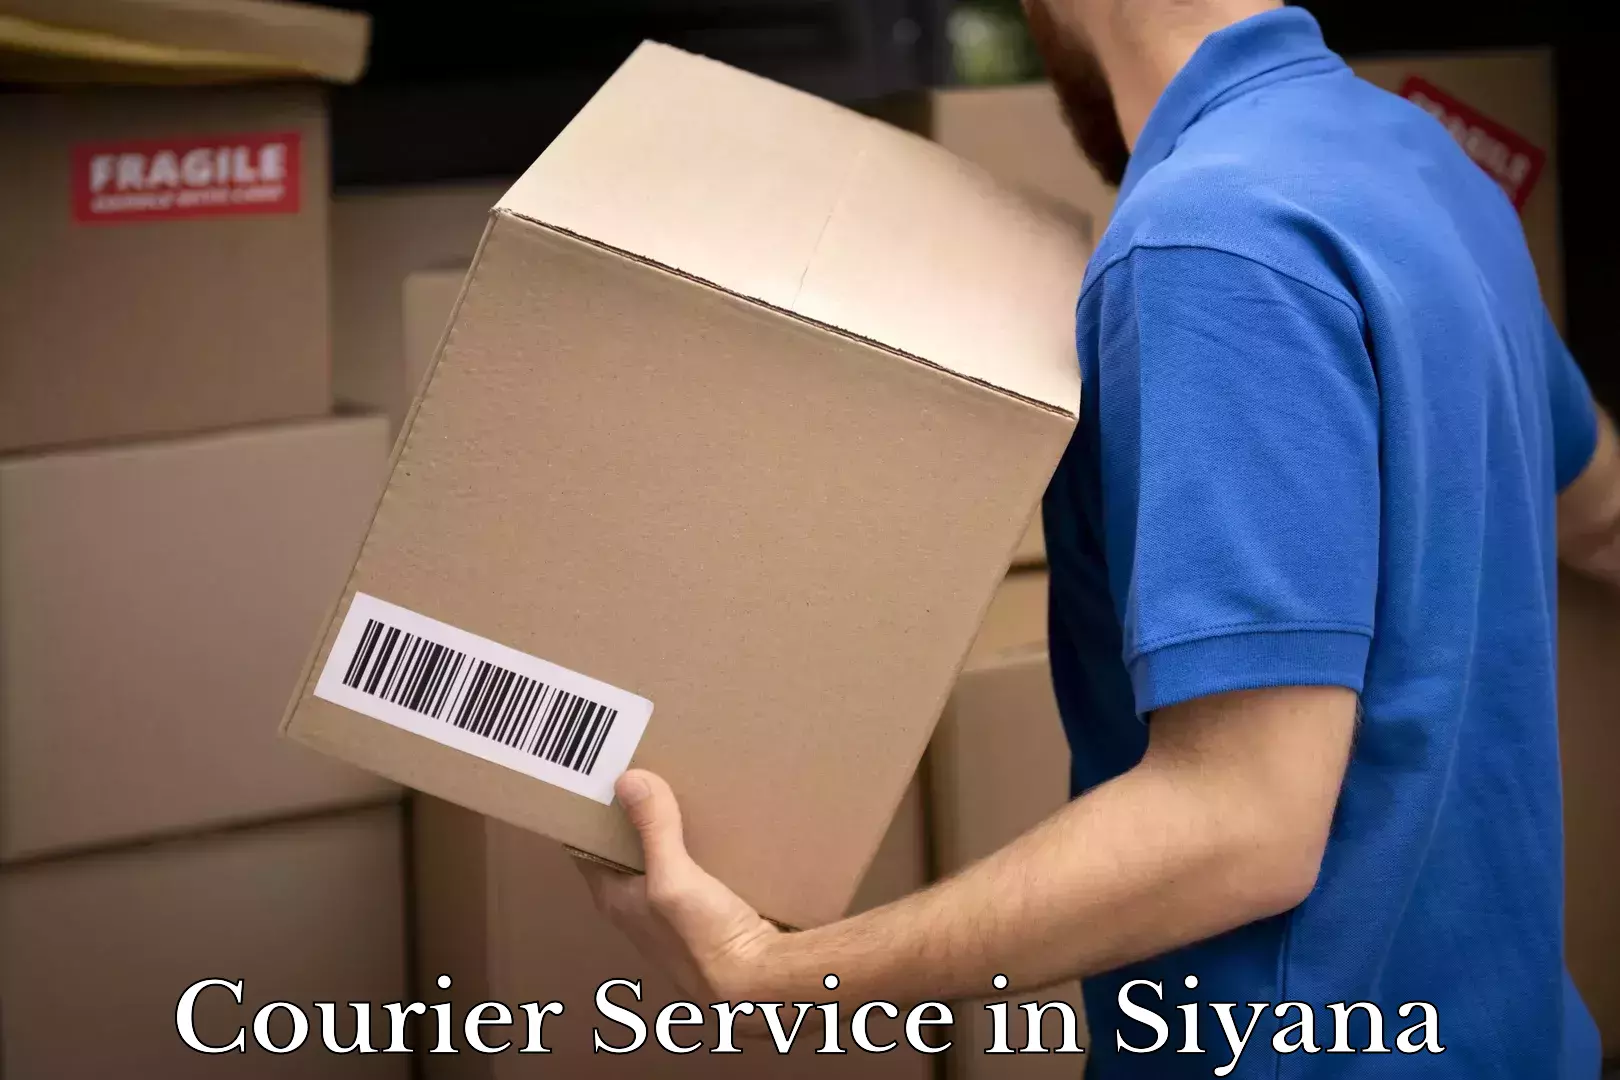 Next-day freight services in Siyana